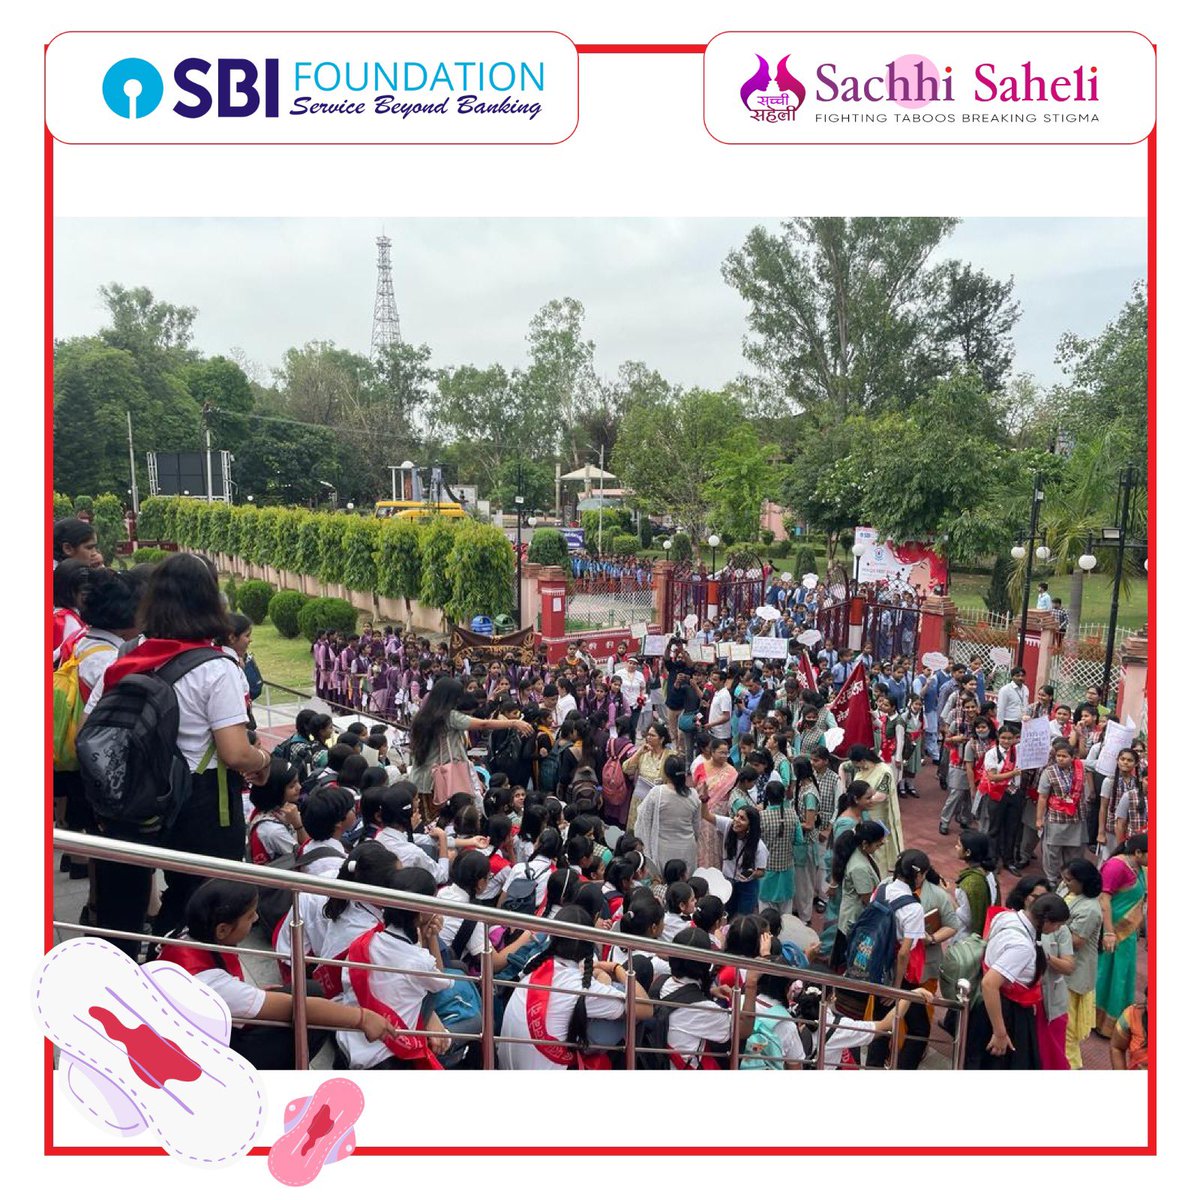 Grateful for the tremendous success of #PeriodsFest! Heartfelt thanks to all who made it possible. Special shout-out to the @SBI_FOUNDATION for making PeriodsDay in Meerut a reality for the first time. Together, we foster change, break barriers, & promote menstrual health awrness